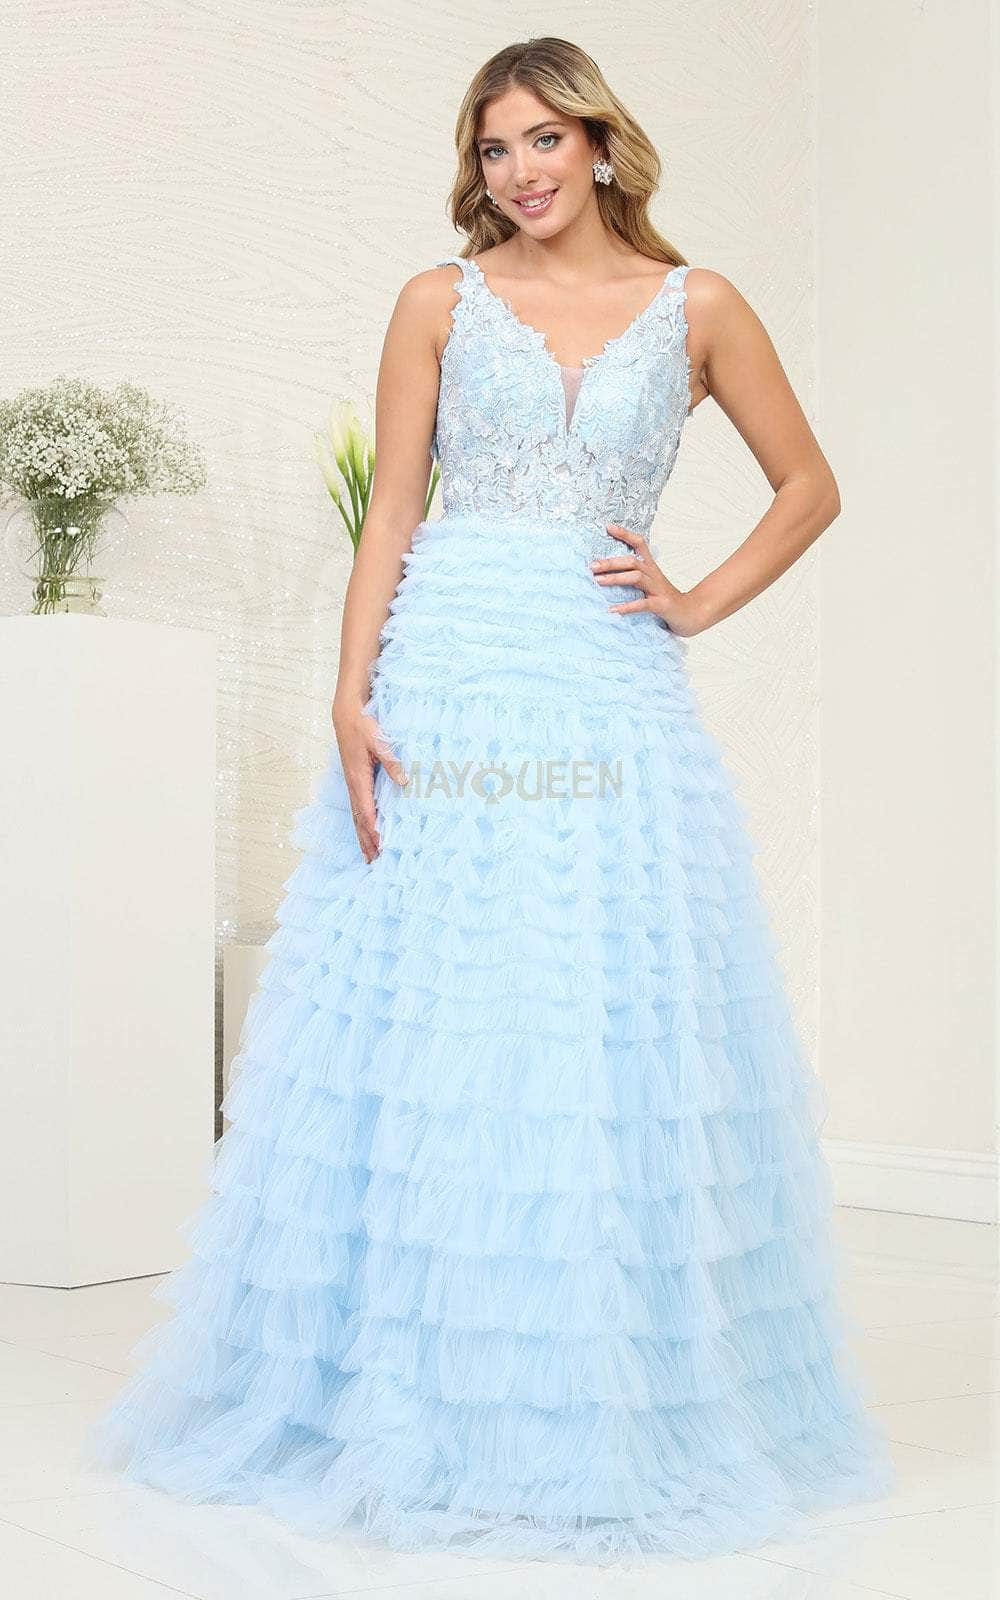 Image of May Queen RQ8123 - Tiered A-Line Prom Dress